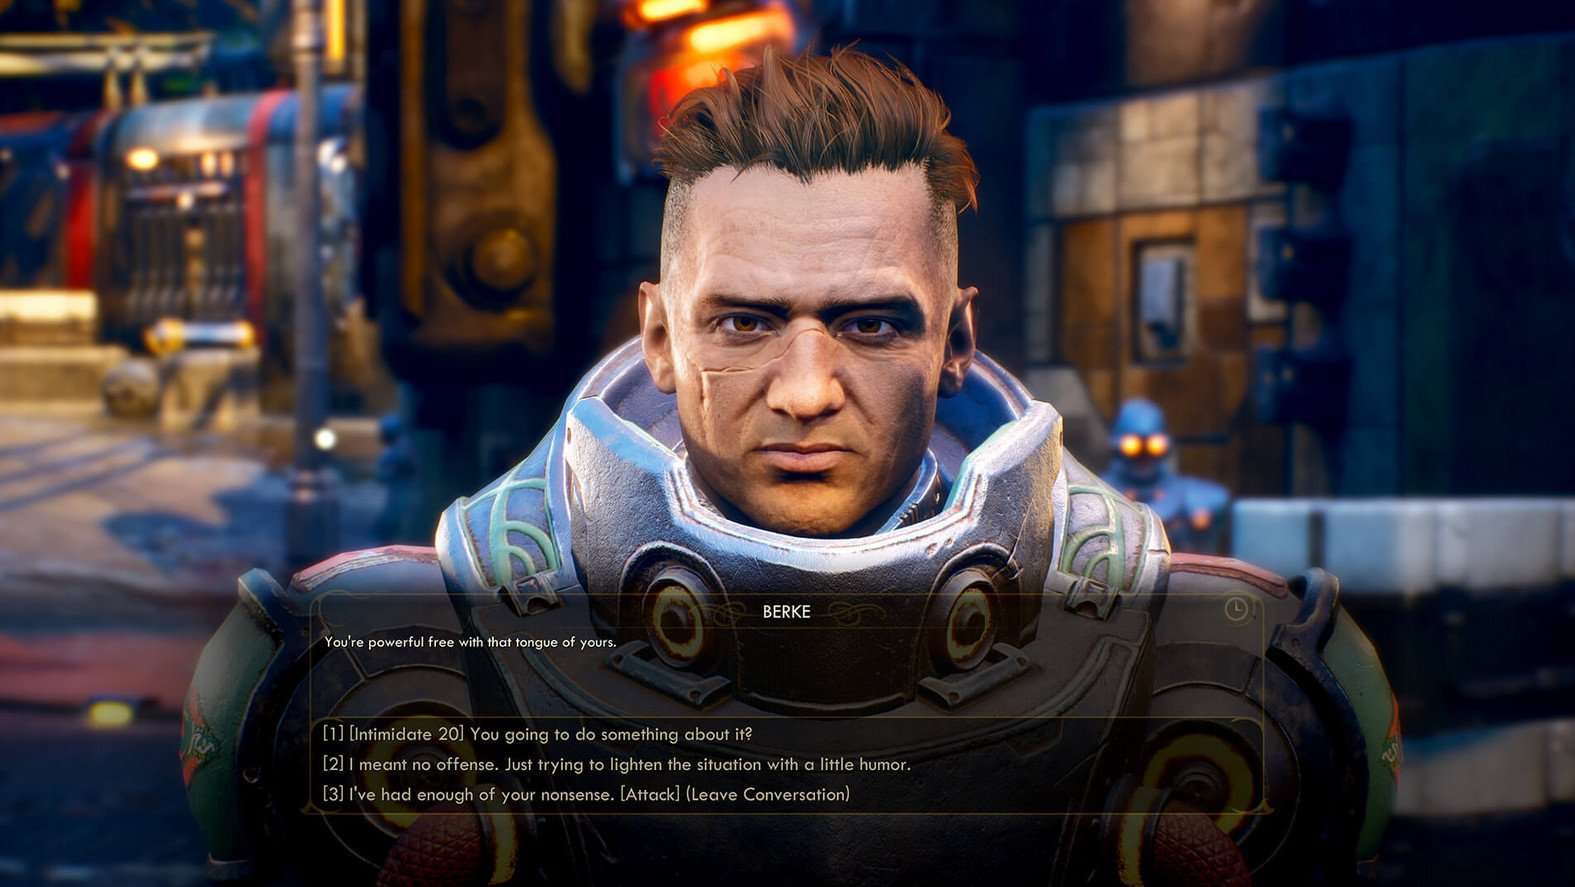 image for Obsidian Says "The Outer Worlds" Will be Free of Microtransactions, Releases Screenshots